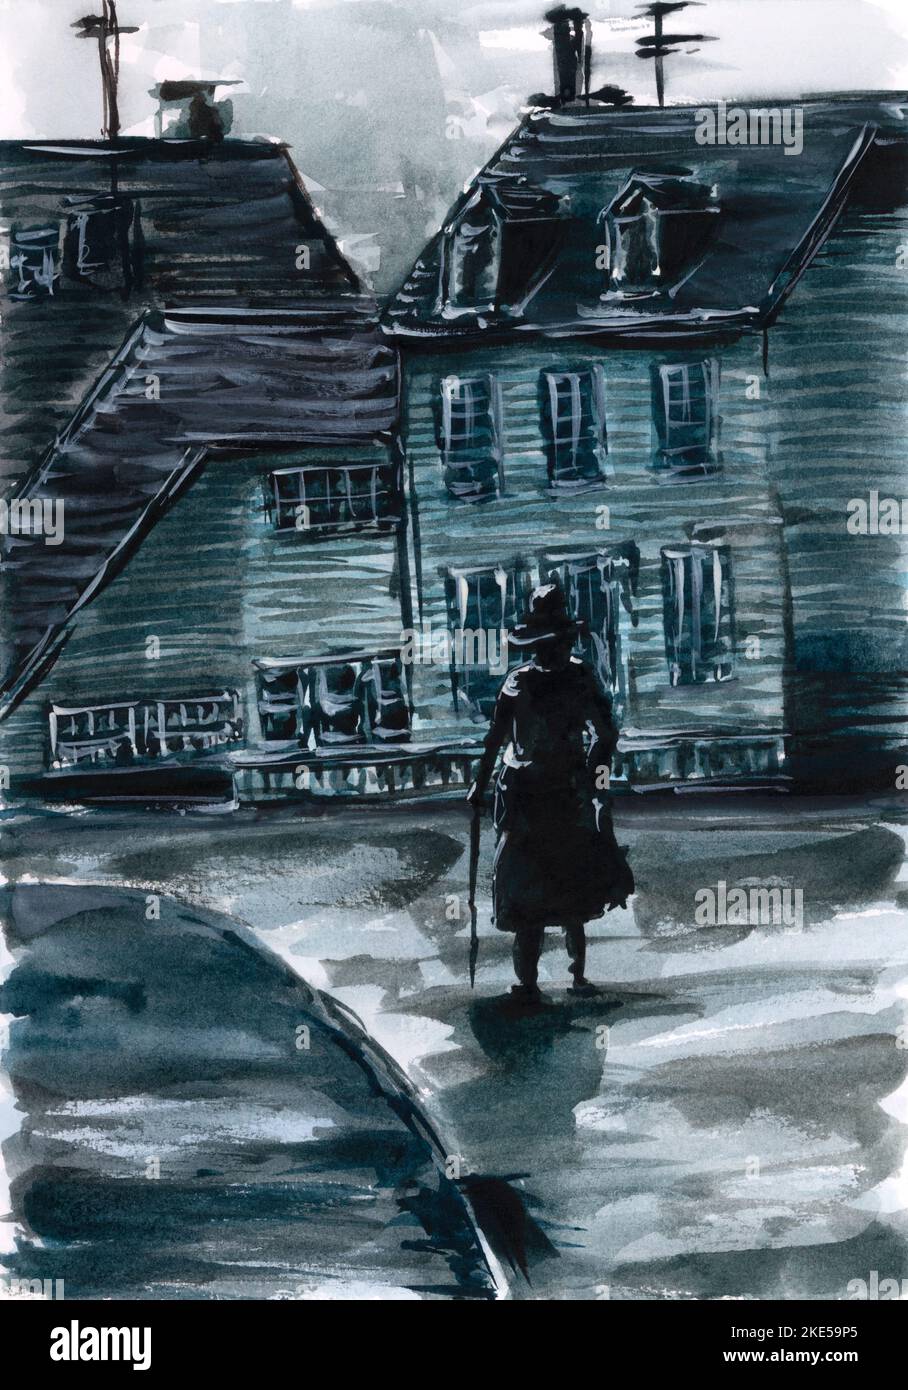 Person on street at moody weather. Watercolor on paper. Stock Photo